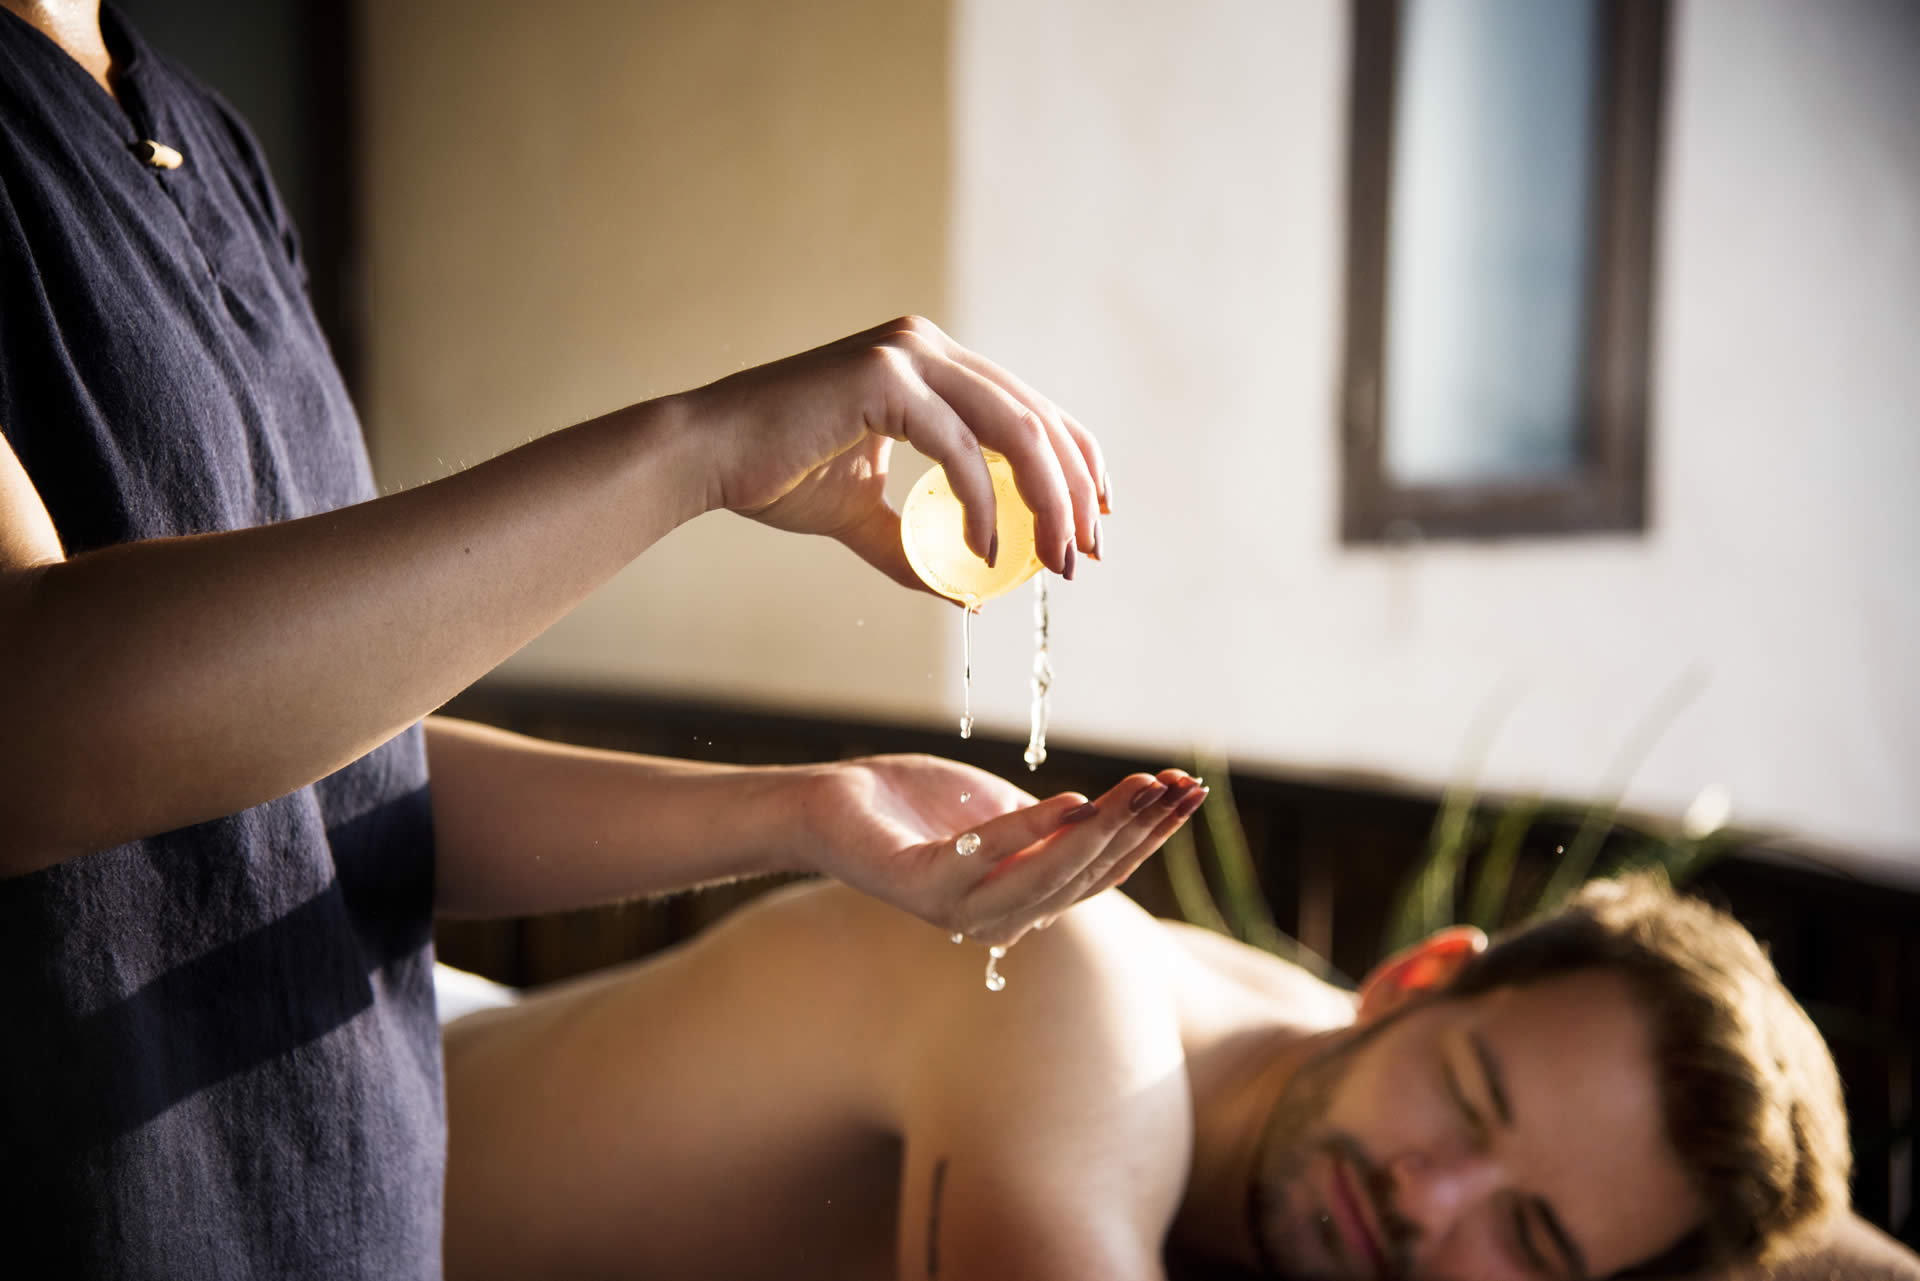 Massage your way to relaxation